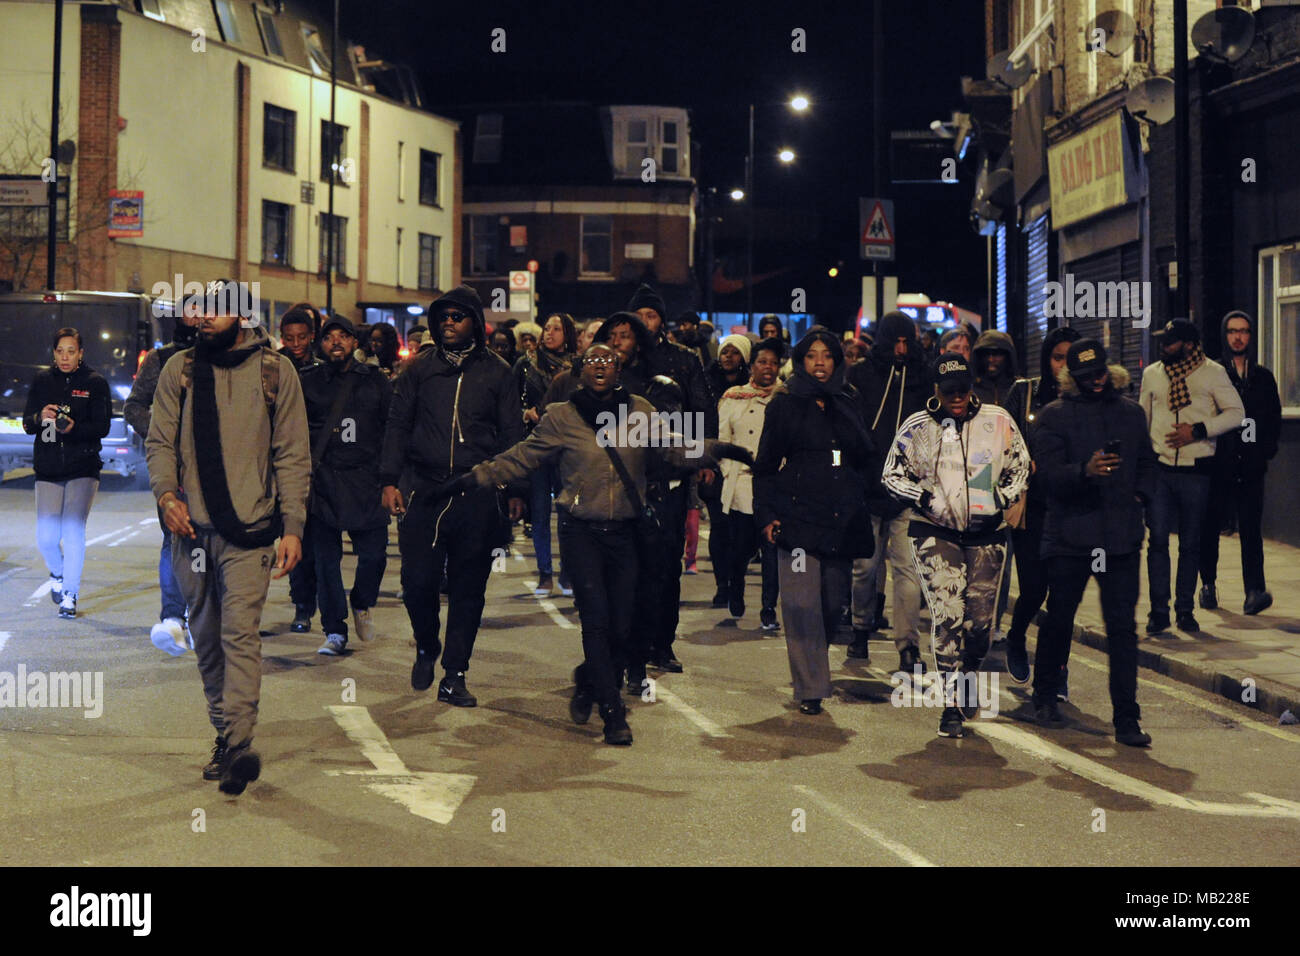 Marchers from the grassroots community organisation, GANG (Guiding A New Generation) along Morning Lane, Hackney, London, United Kingdom.  The demonstration follows the death on Wednesday (04.04.2018) of 18-year-old Israel Ogunsola who was stabbed to death and died in Link Street, Hackney. Police found him wounded after they were alerted by a motorist just before 8.00pm.   He was given first aid by police officers, but died at the scene at 8.24pm. He was initially thought to be aged in his 20s.  GANG is a youth outreach movement which focusses on the black community and implores young men in t Stock Photo